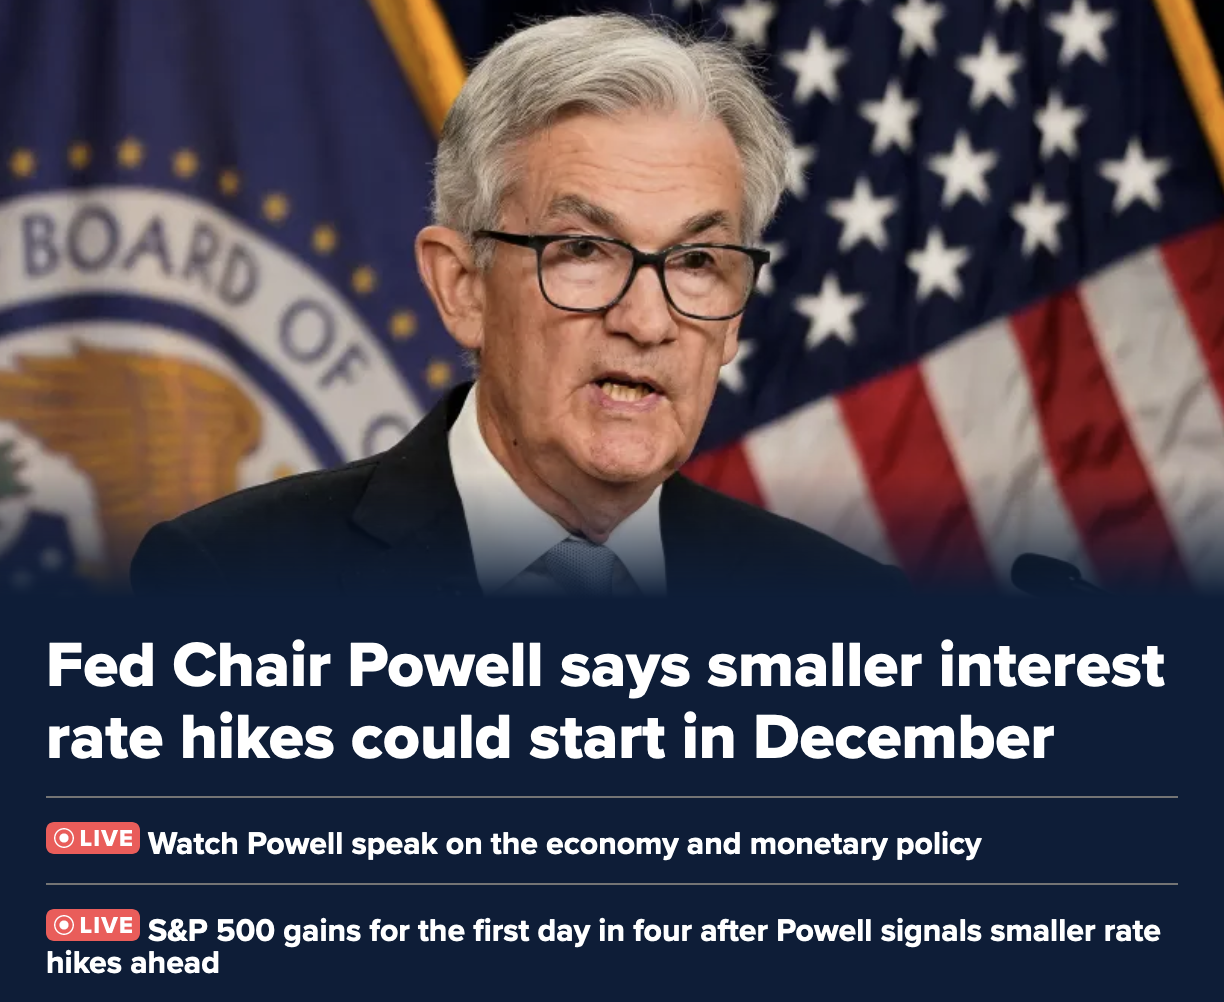 jerome powell press conference on rate hikes